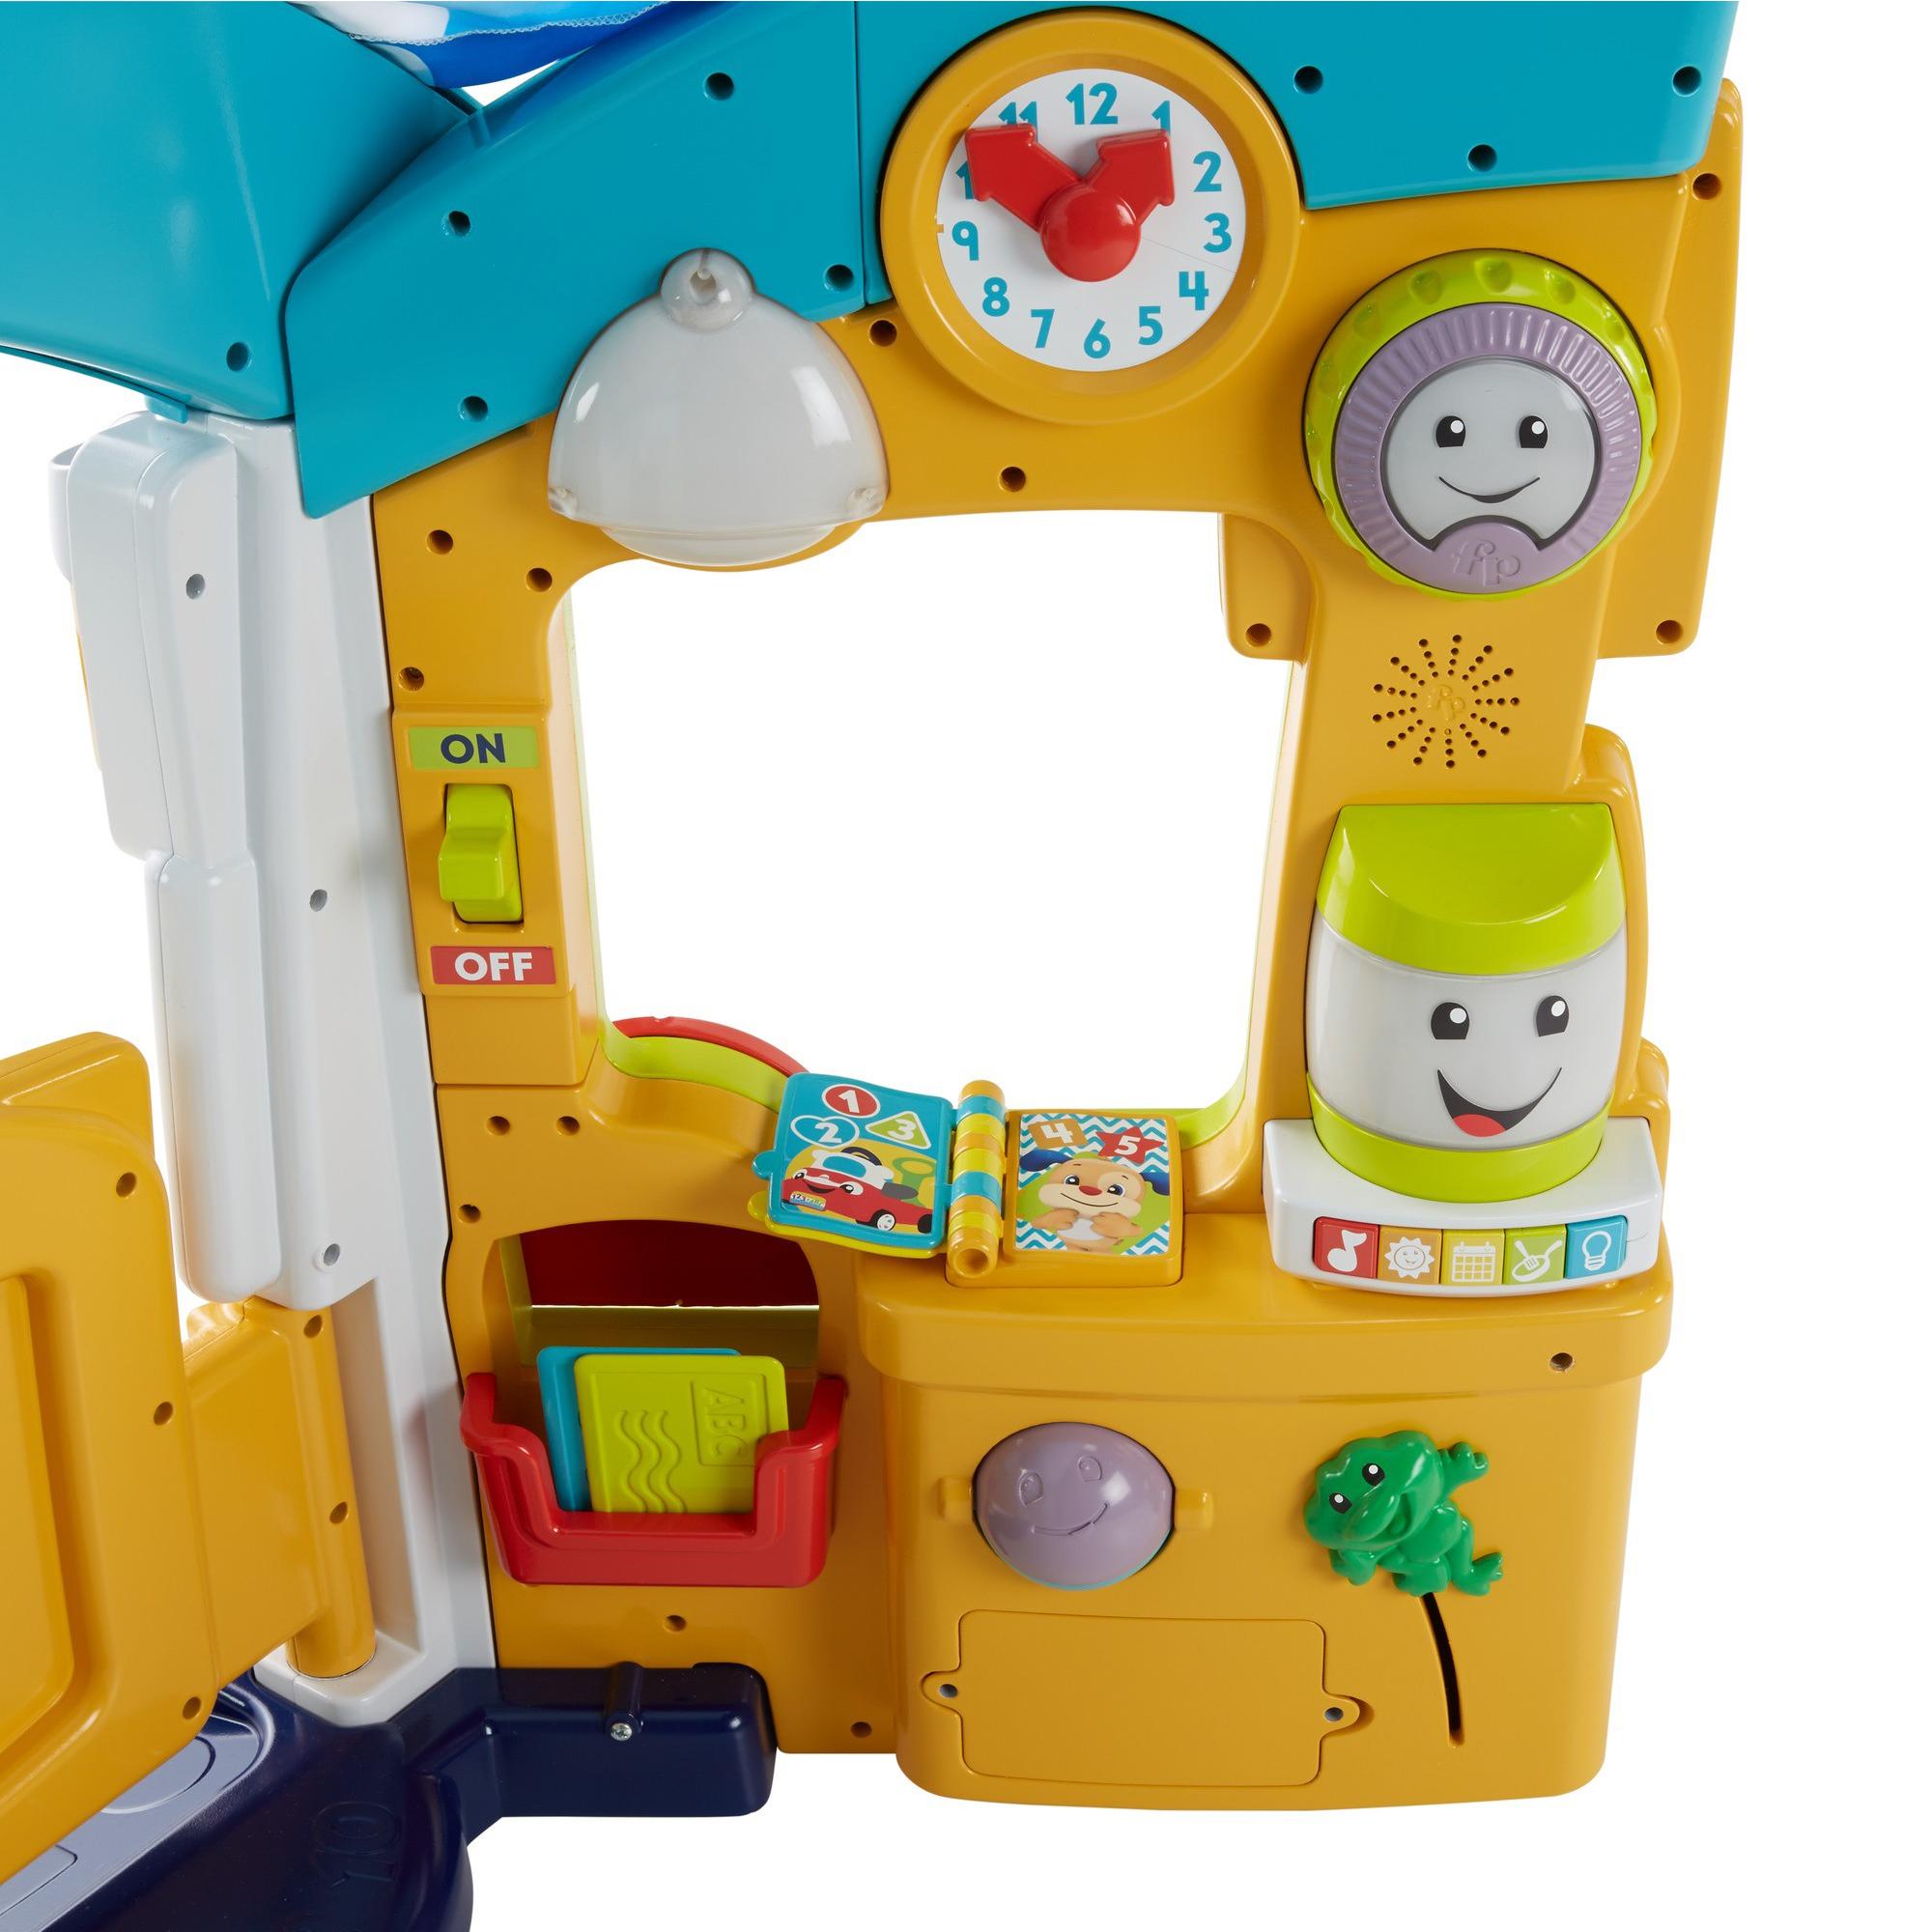 Fisher-Price Laugh & Learn Playhouse Educational Toy for Babies & Toddlers, Smart Learning Home - image 17 of 25